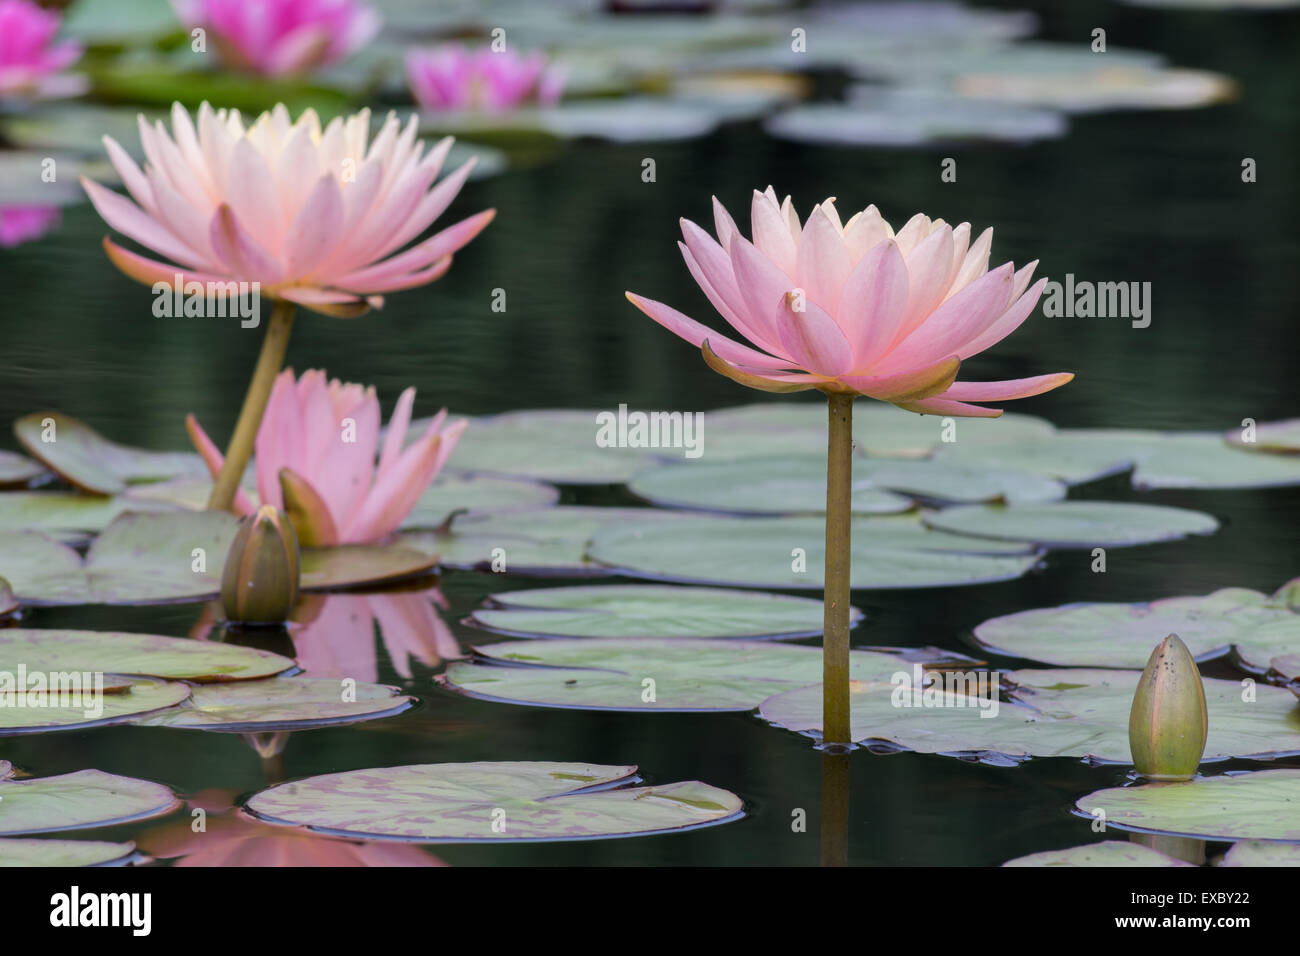 Two pink water lilies lily leaves bud Stock Photo